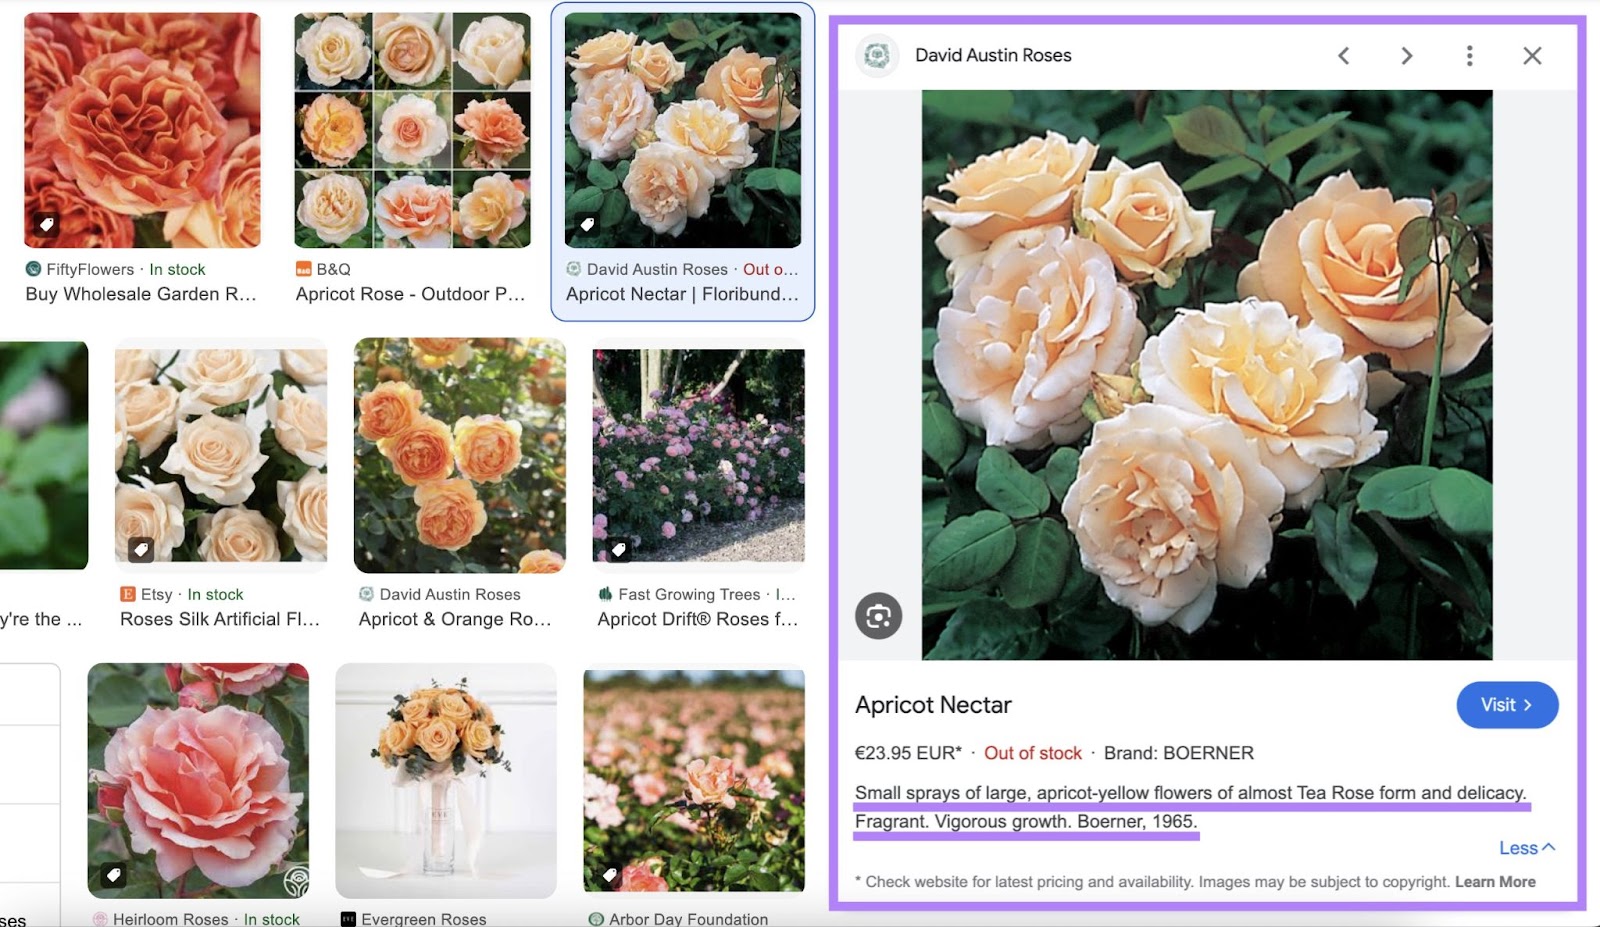 expanded google image result of a rose shows the meta description